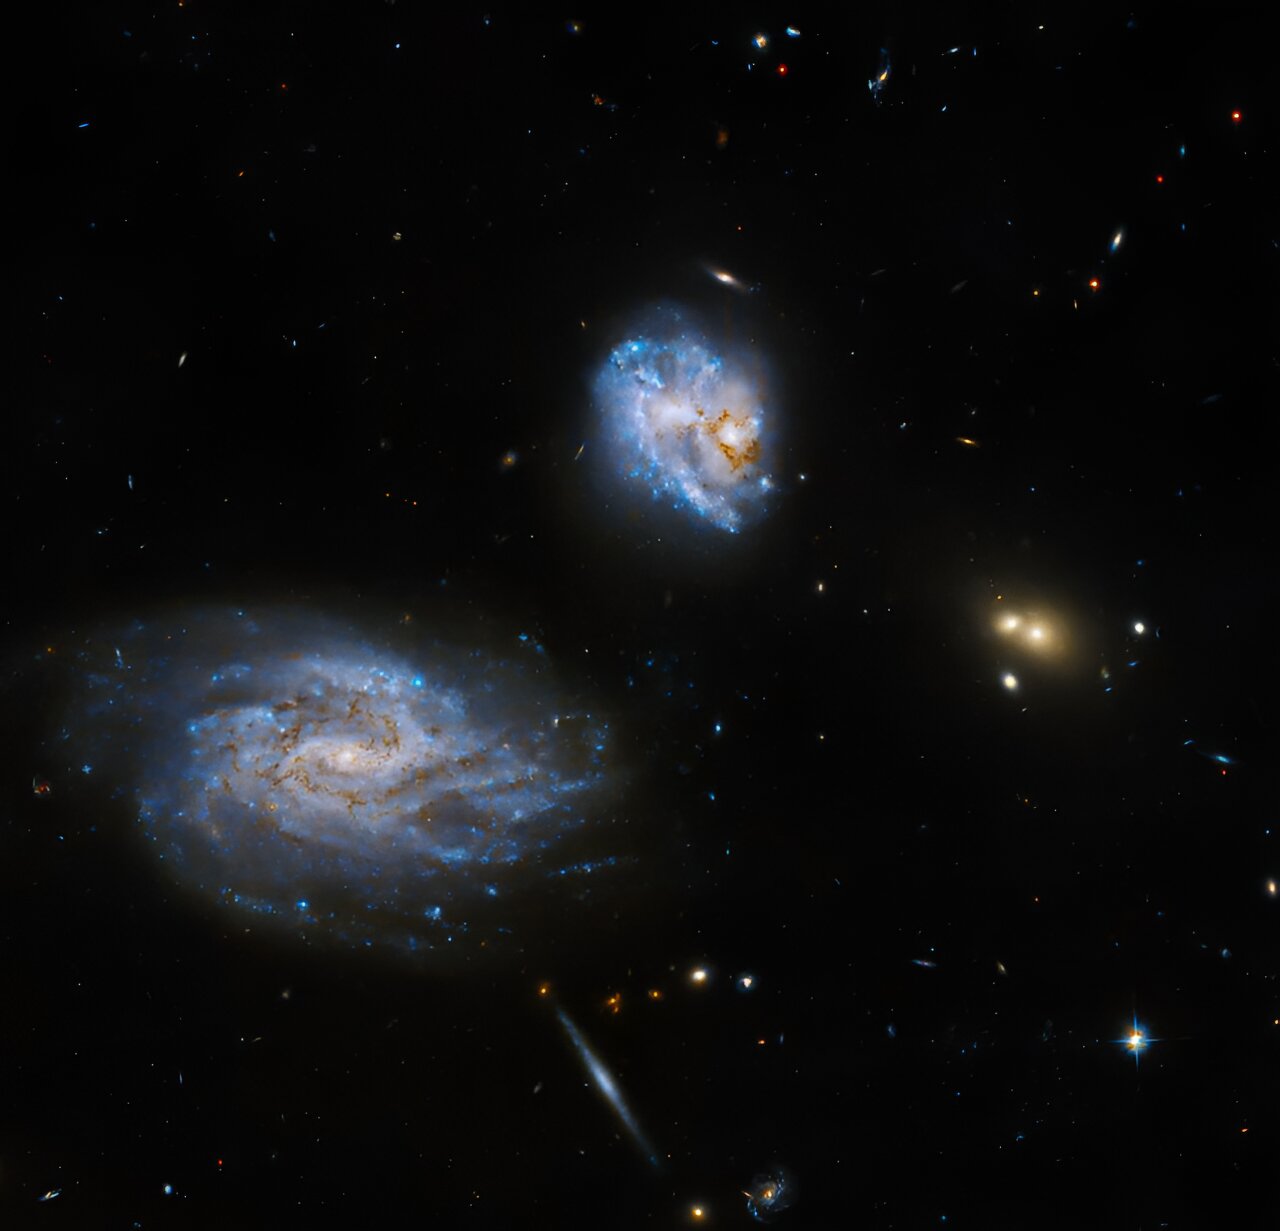 Hubble Observes a Tilted Galaxy Encouraging Star Formation in its Companion.